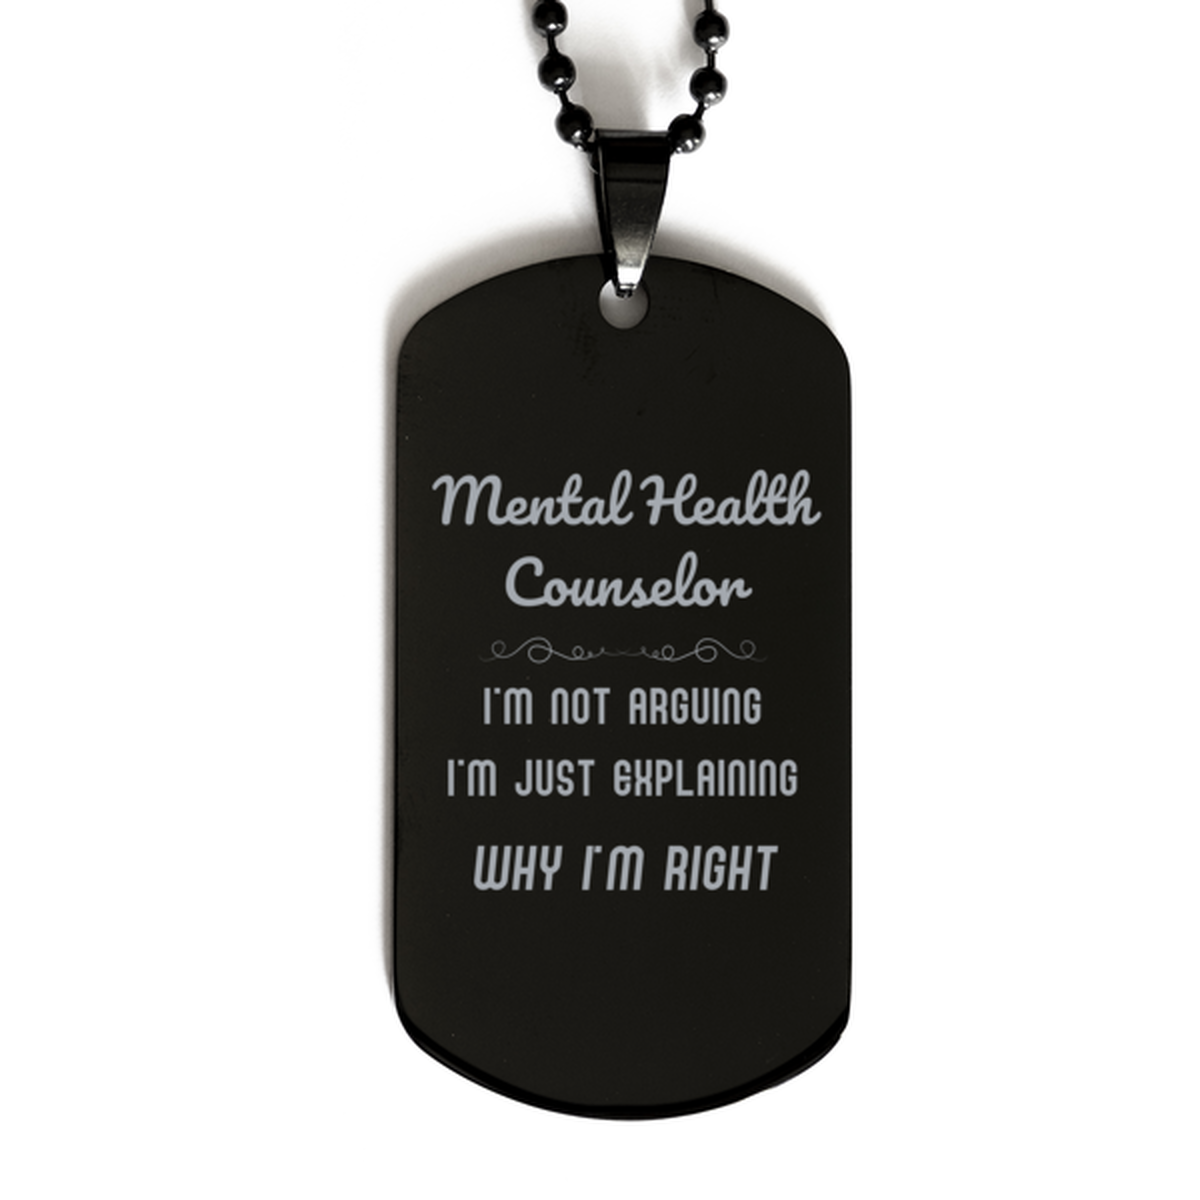 Mental Health Counselor I'm not Arguing. I'm Just Explaining Why I'm RIGHT Black Dog Tag, Funny Saying Quote Mental Health Counselor Gifts For Mental Health Counselor Graduation Birthday Christmas Gifts for Men Women Coworker